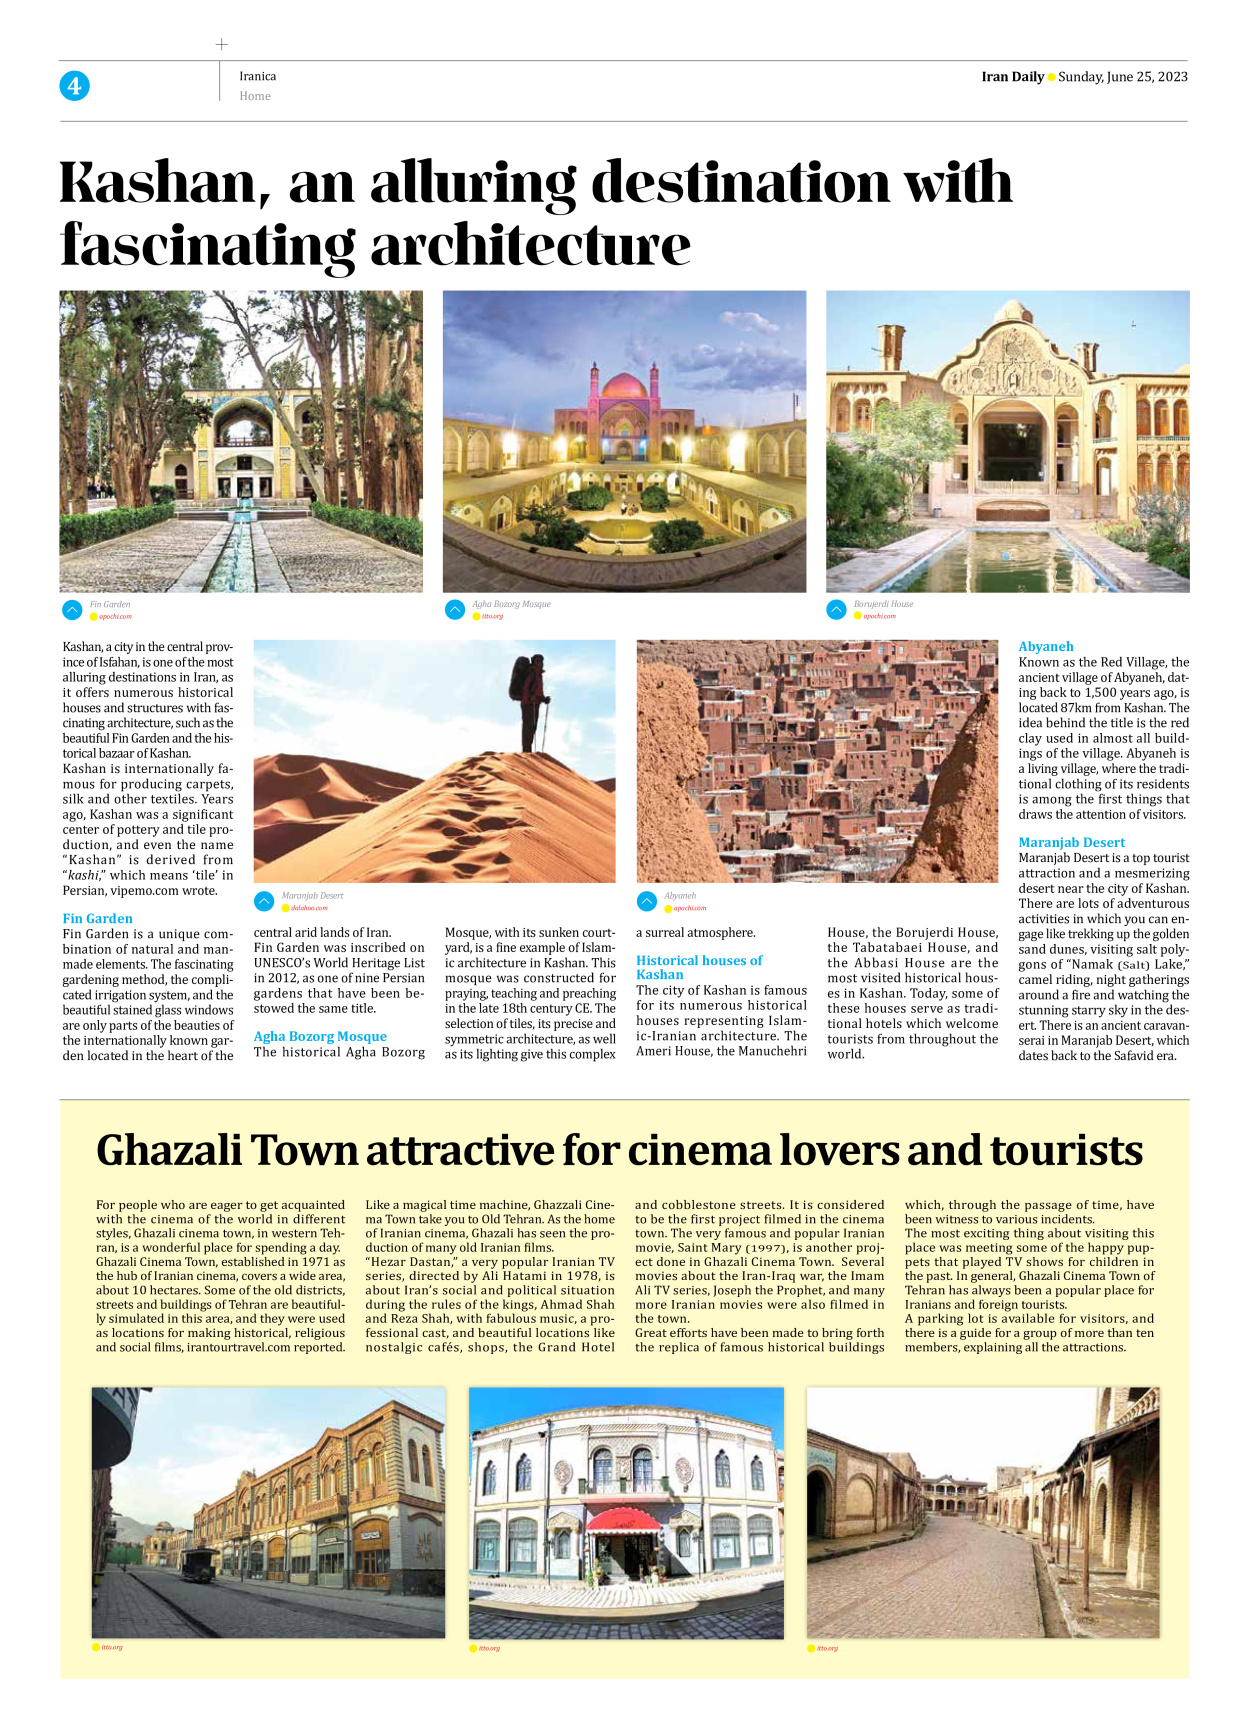 Iran Daily - Number Seven Thousand Three Hundred and Twenty Three - 25 June 2023 - Page 4